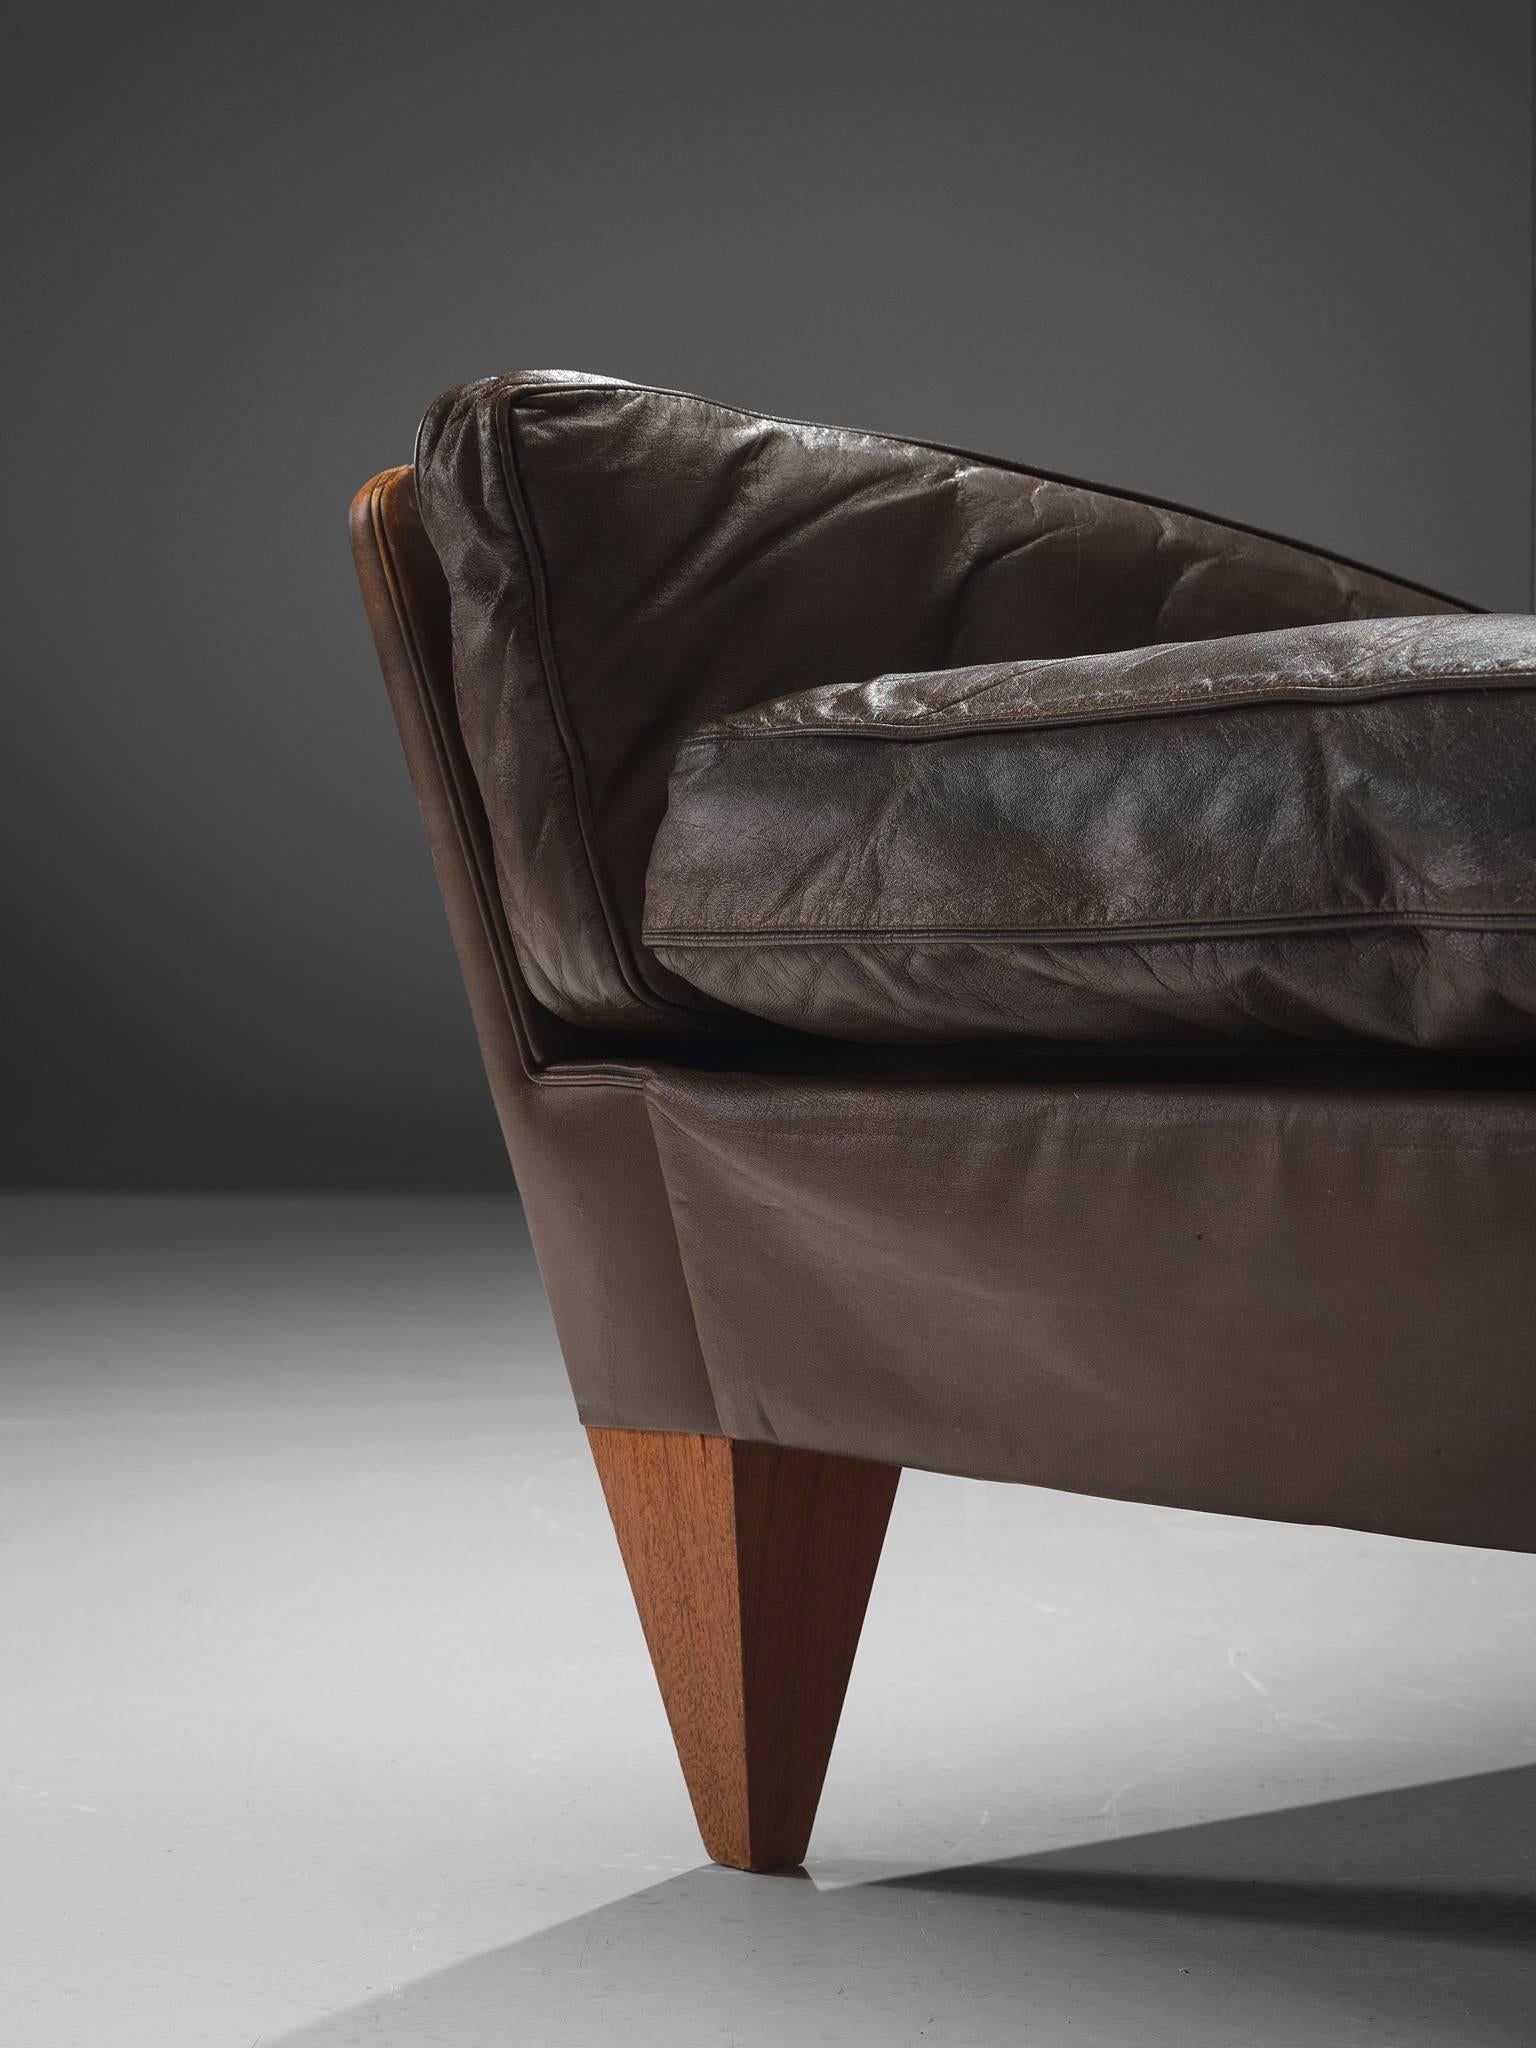 Illum Wikkelsø 'Pyramid' Chair in Teak and Leather 1